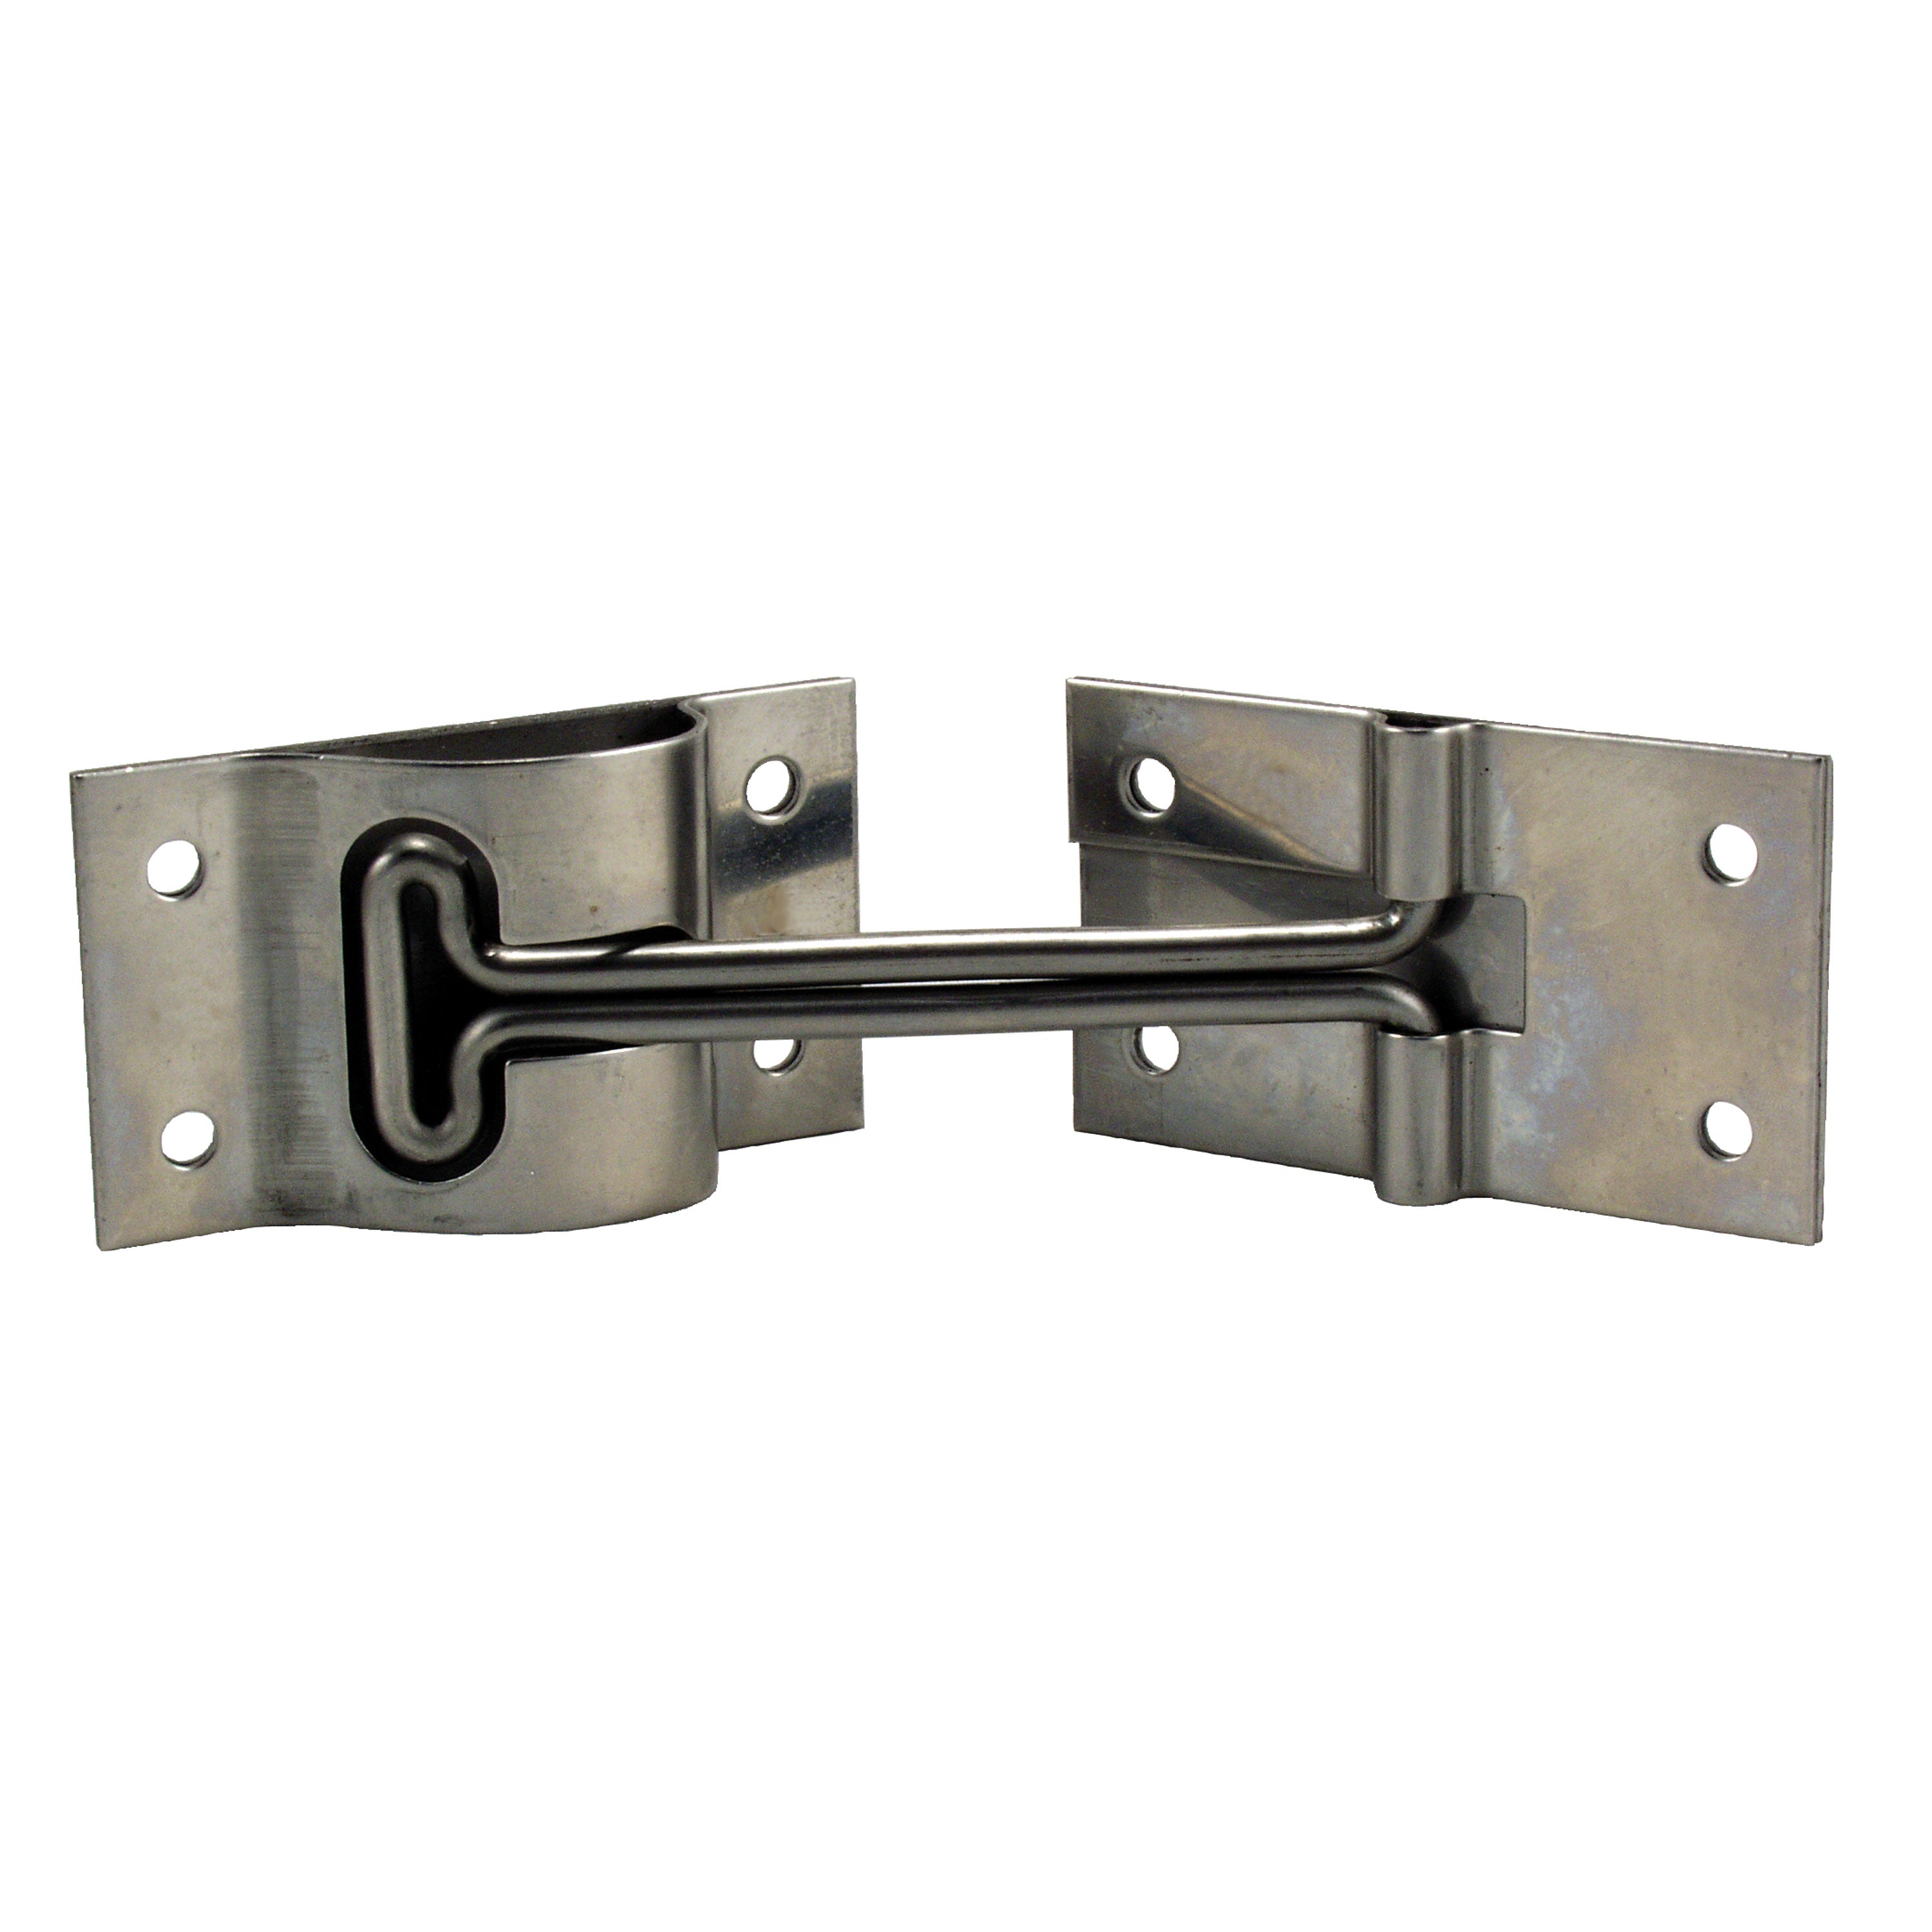 JR Products 10515 Stainless Steel T-Style Door Holder - 4"